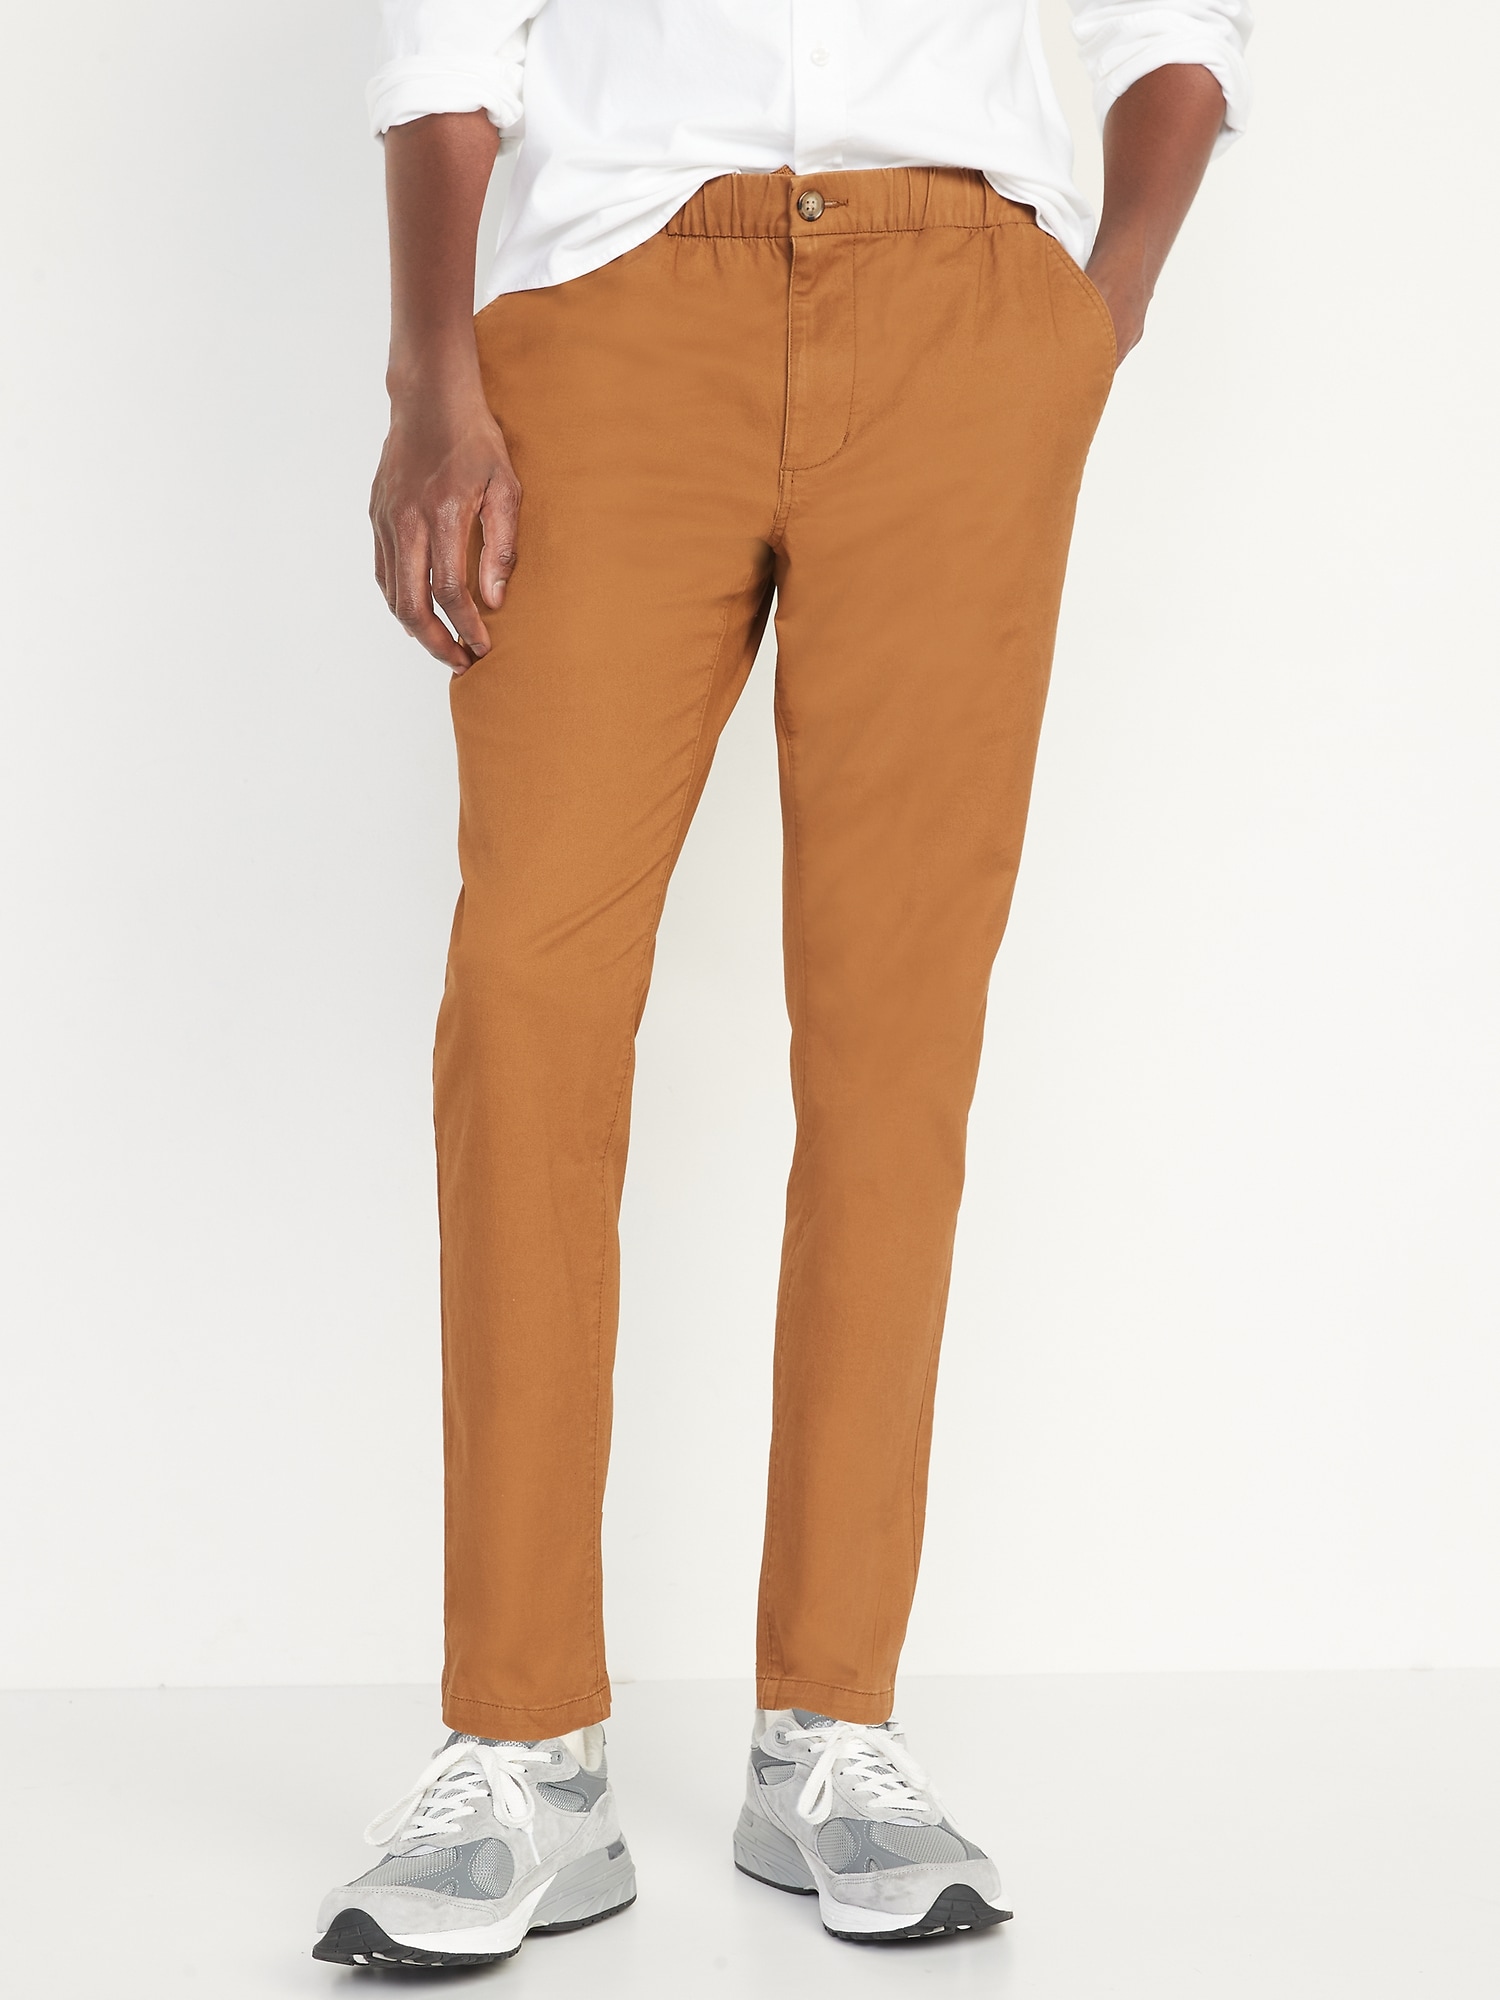 Old Navy Men's Slim Taper Built-In Flex Pull-On Chino Pants (various size in bourbon)